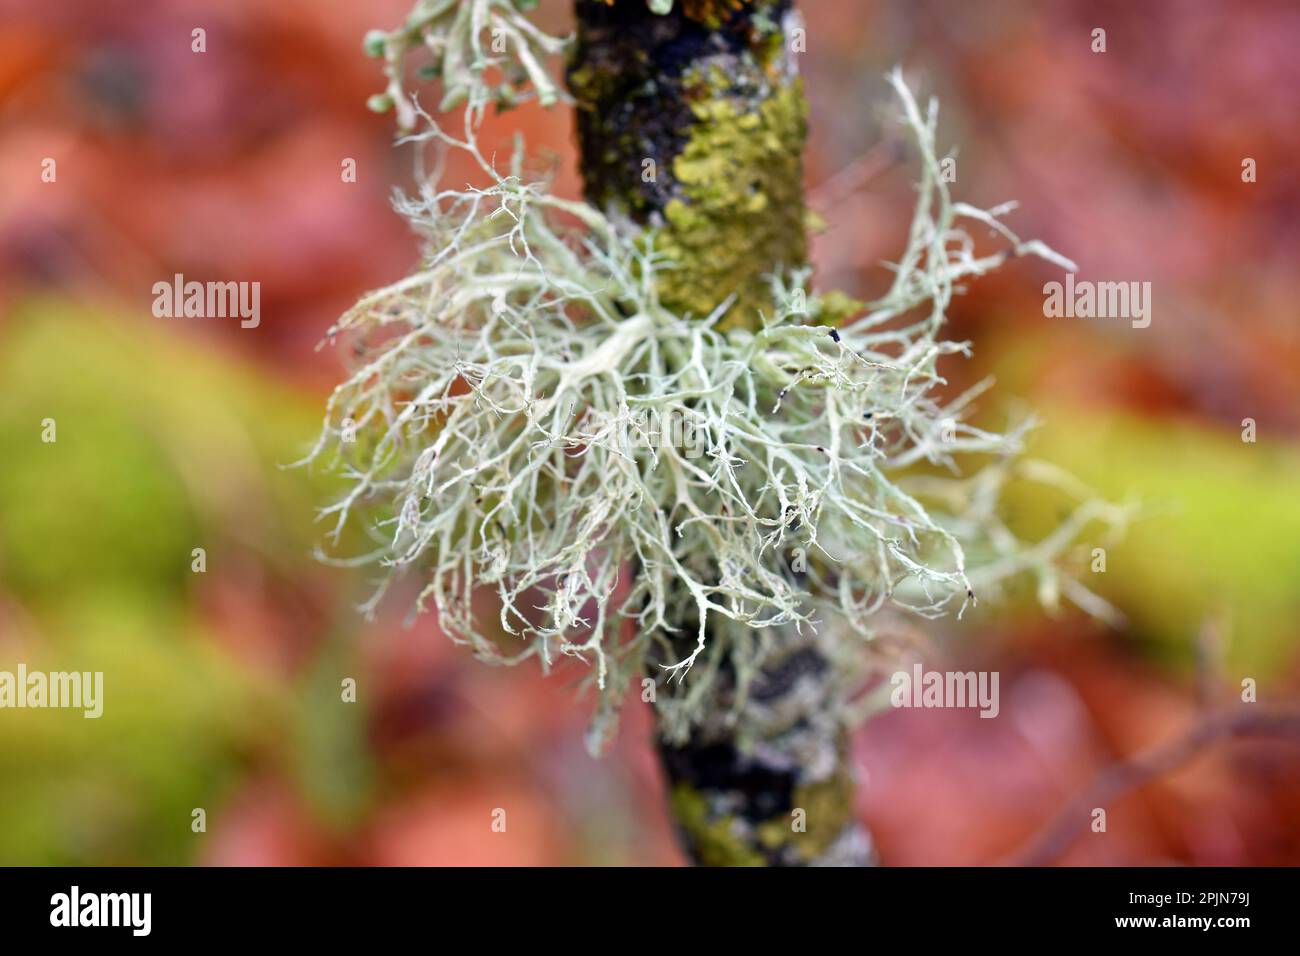 The fruticulous lichen Ramalina farinacea on a branch in a beech forest Stock Photo